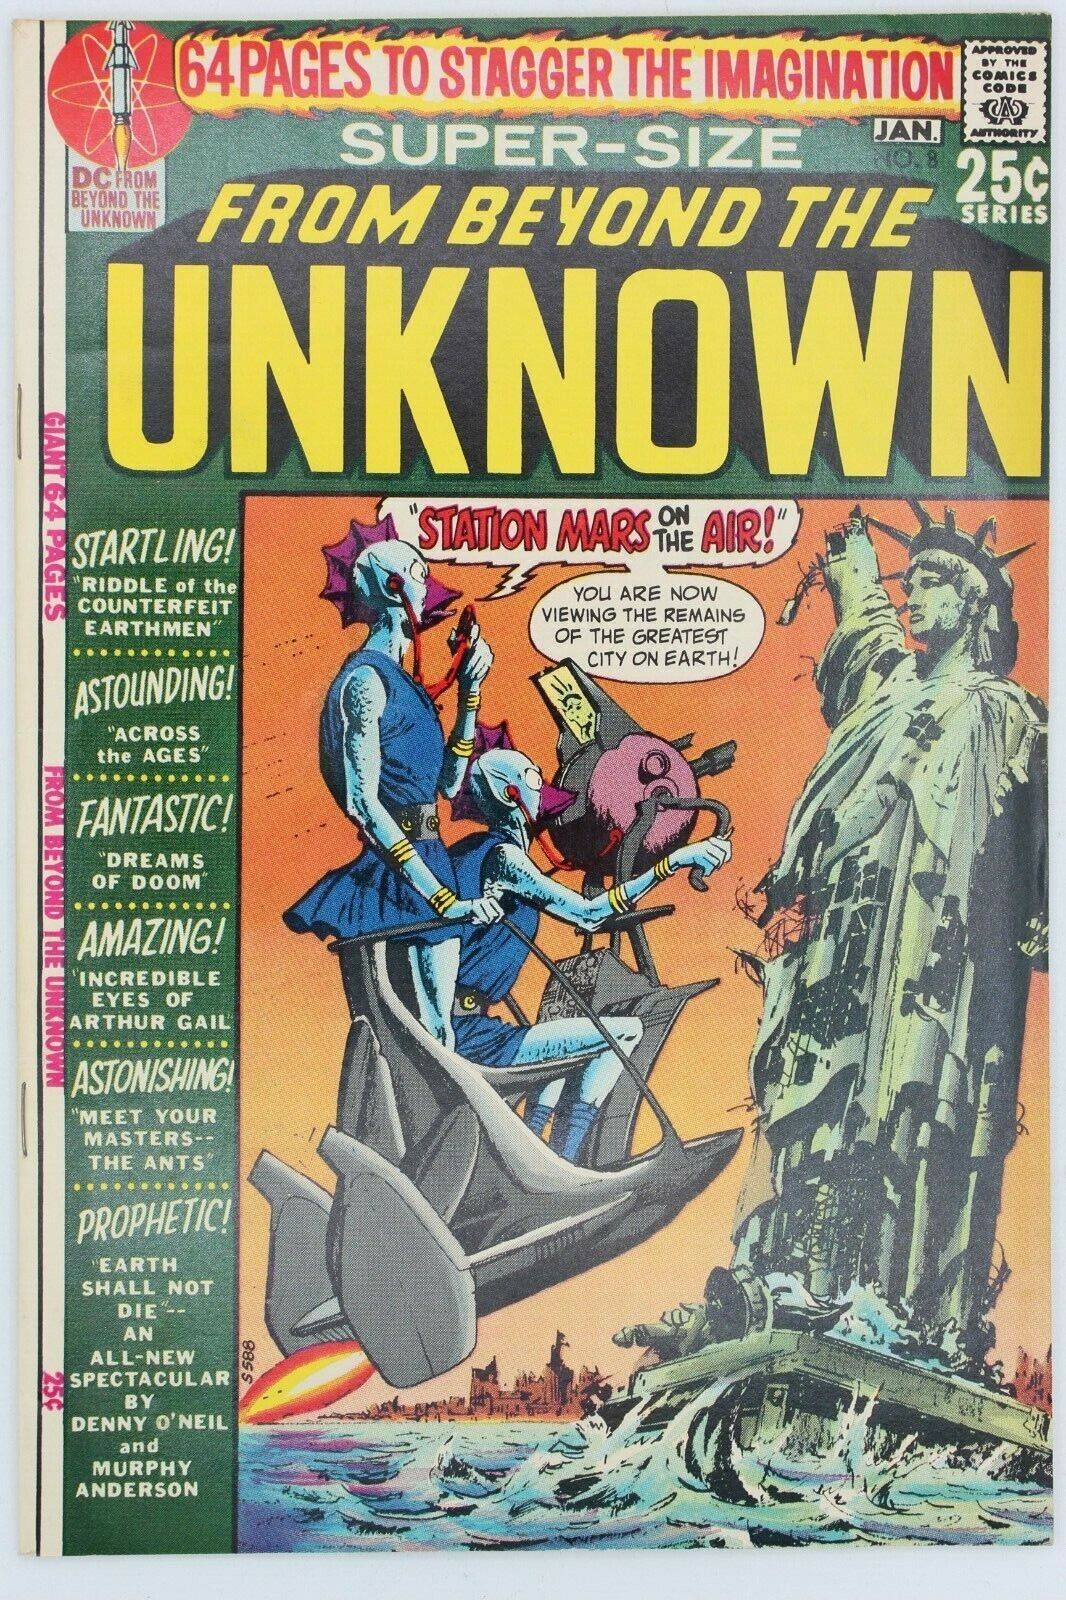 Super-Size From Beyond the Unknown #8 DC Comics